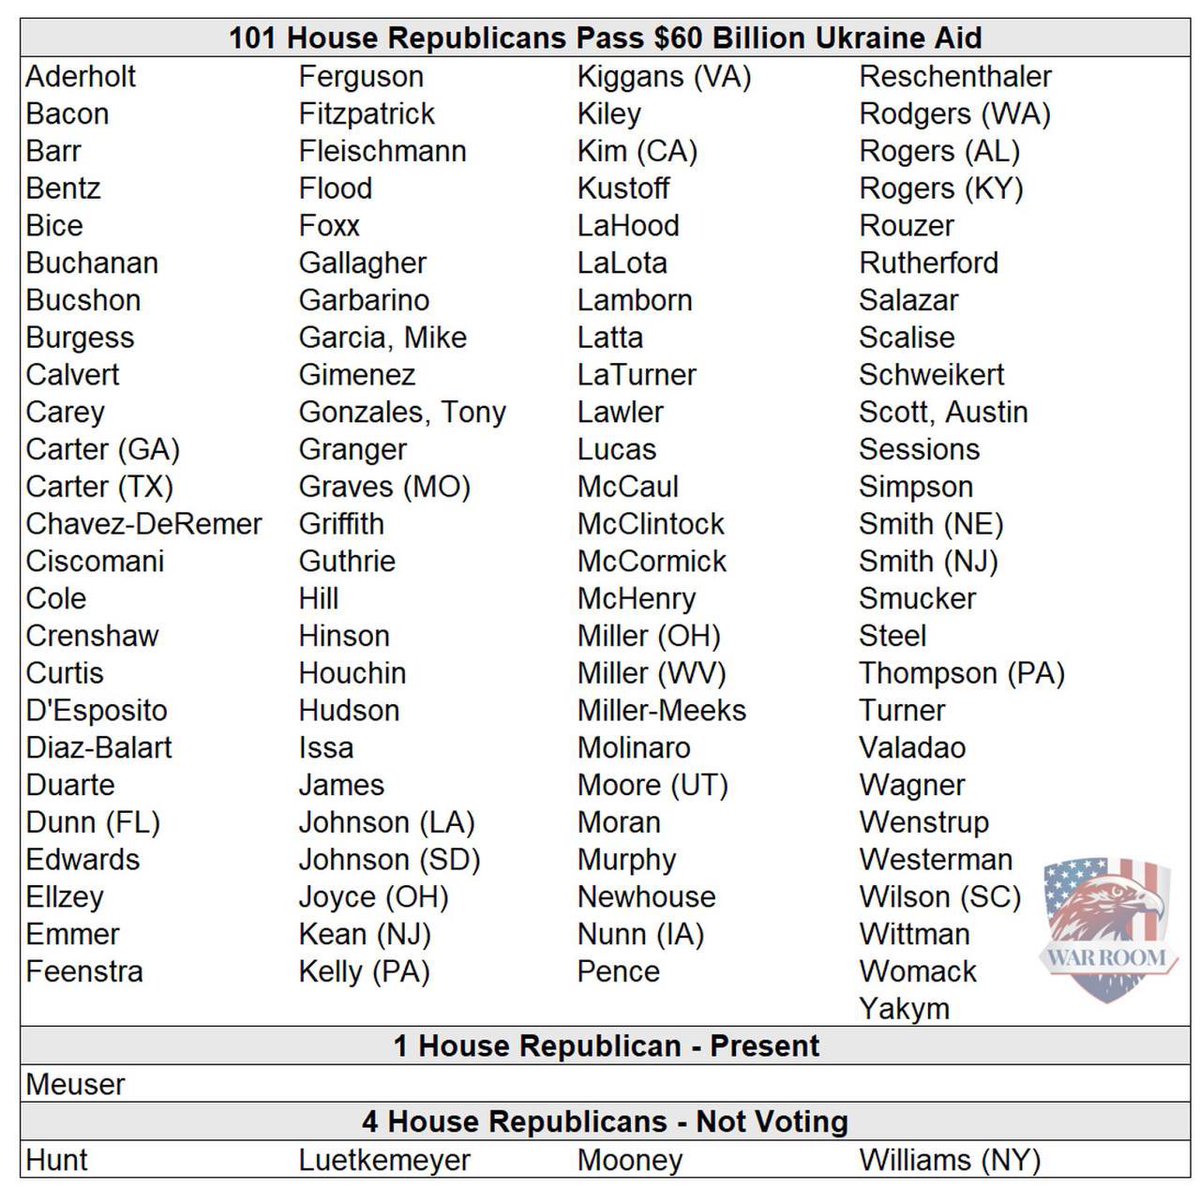 101 House Republicans Pass $60B #Ukraine Aid; 1 Present; 4 Did Not Vote Looking more and more like a Uniparty isn’t it❓😡